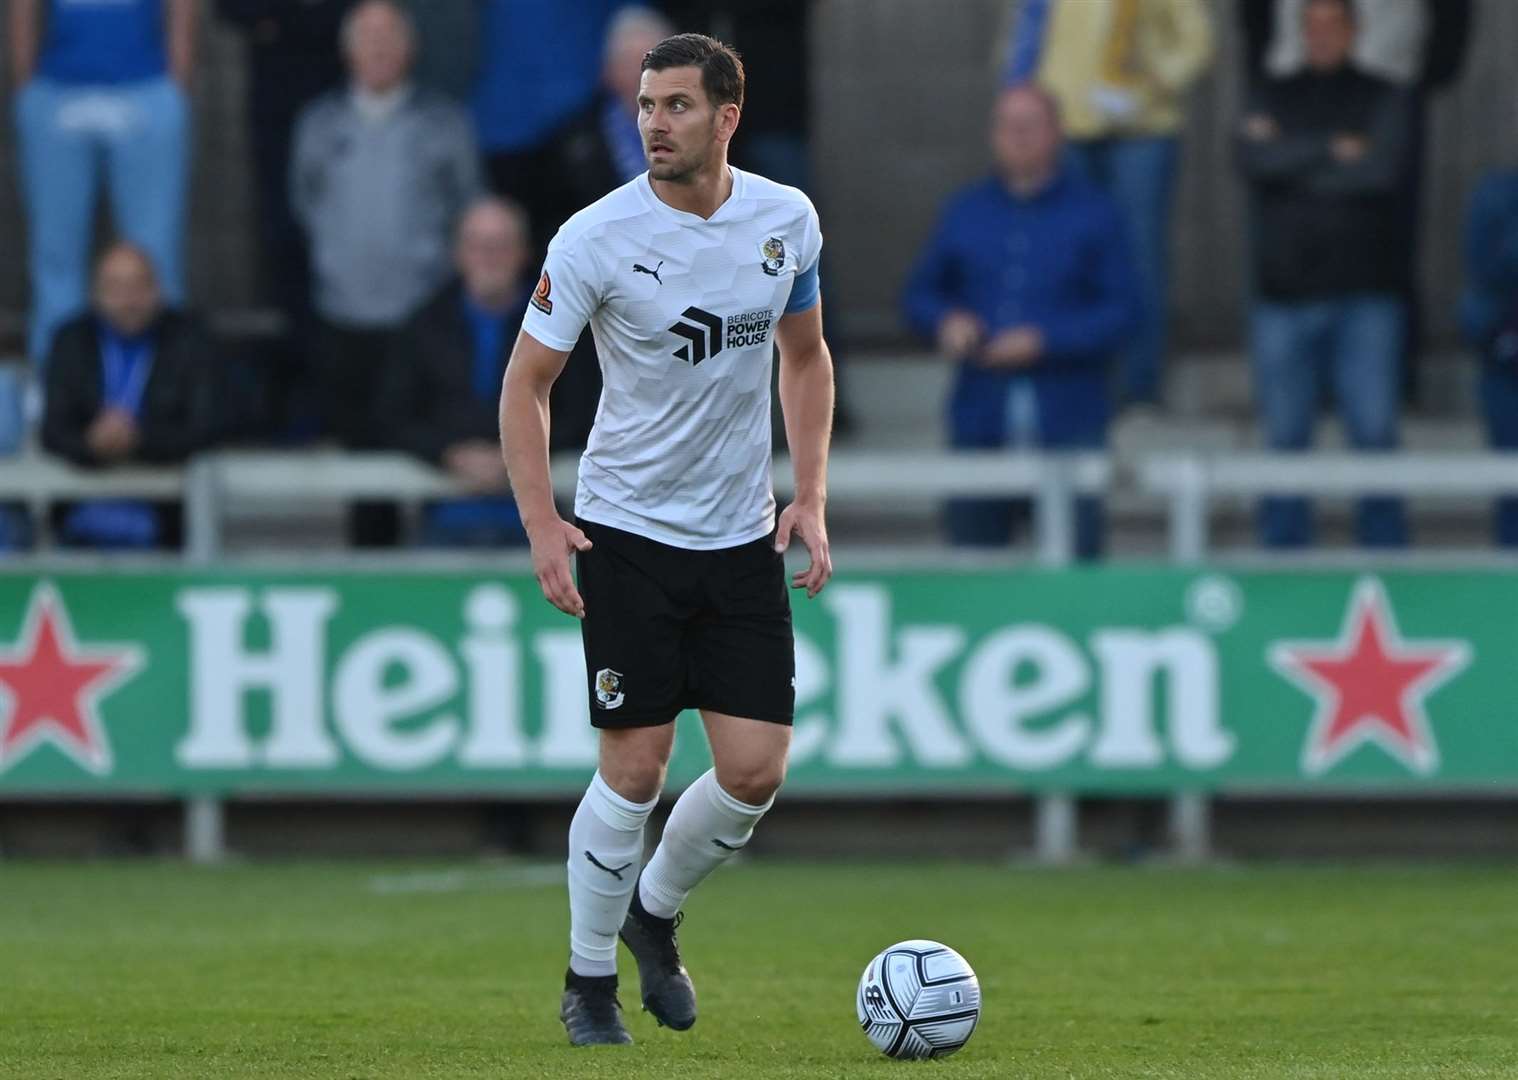 Keeping the services of Dartford captain Tom Bonner was new manager Alan Dowson's top priority. Picture: Keith Gillard